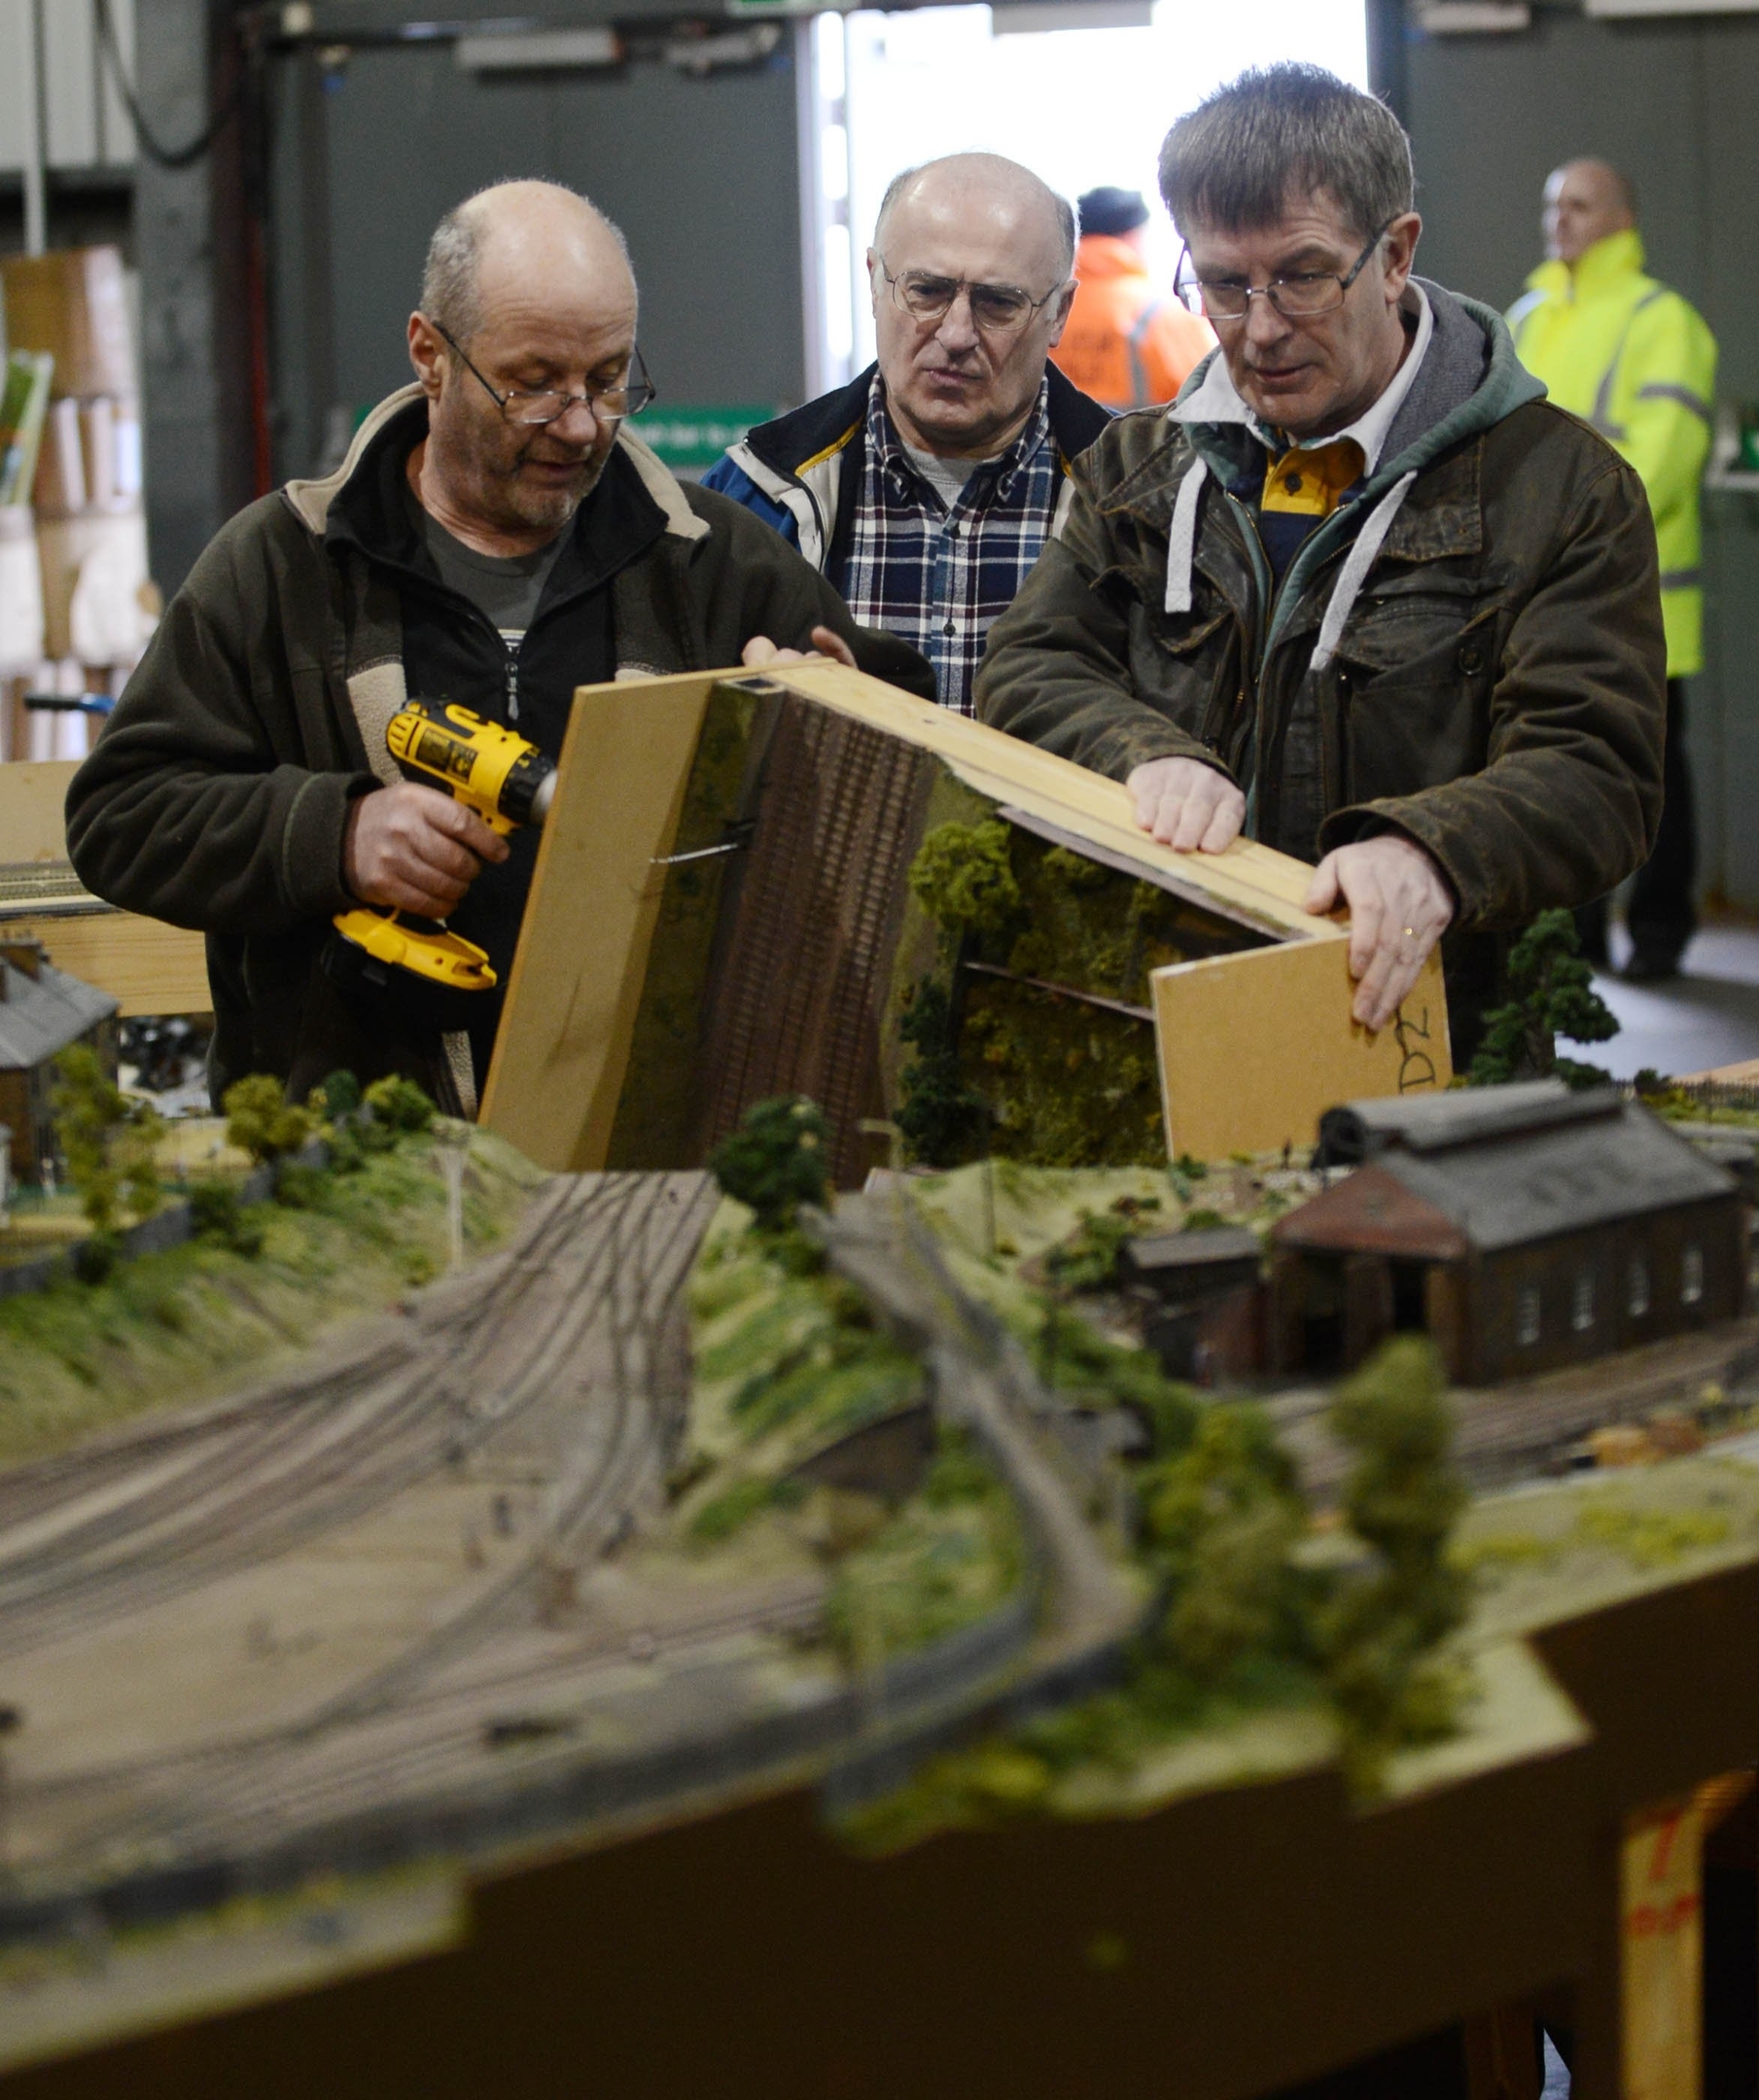 Members get layout ready, a model of the Old Railway Station in Alloa, ahead of the 50th annual gathering of model railway enthusiasts displaying at Glasgow's SECC from tomorrow, Friday 26th to Sunday 28th Febuary, where 30 different clubs from across the UK and further are expected to display. See Centre Press story CPRAIL; Thousands of model railway enthusiasts gather for convention.